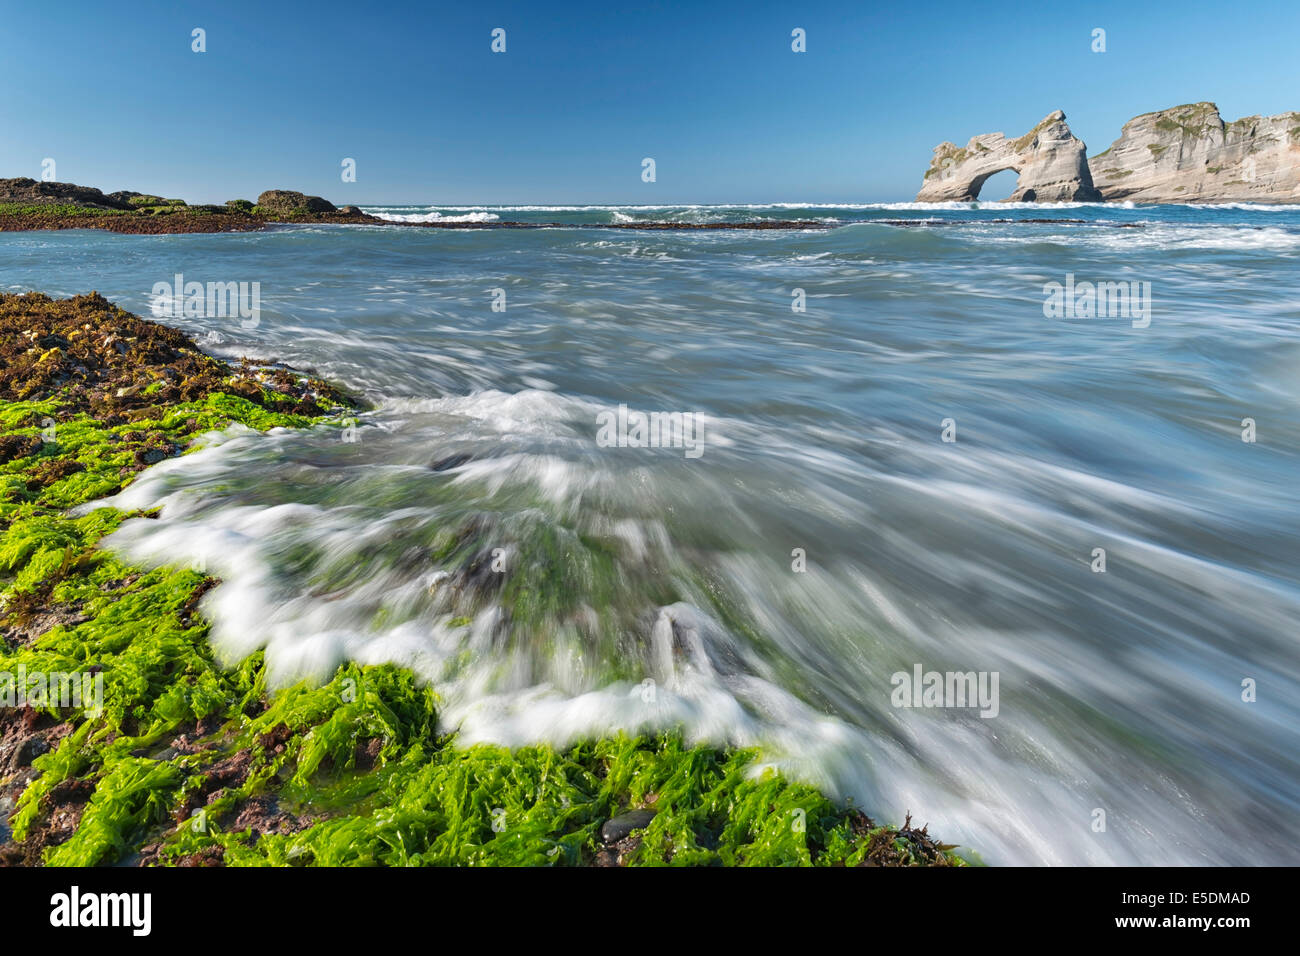 New Zealand, Golden Bay, Wharariki Beach, waves gushing over rocks with seaweed at the beach and rock arch in the background Stock Photo